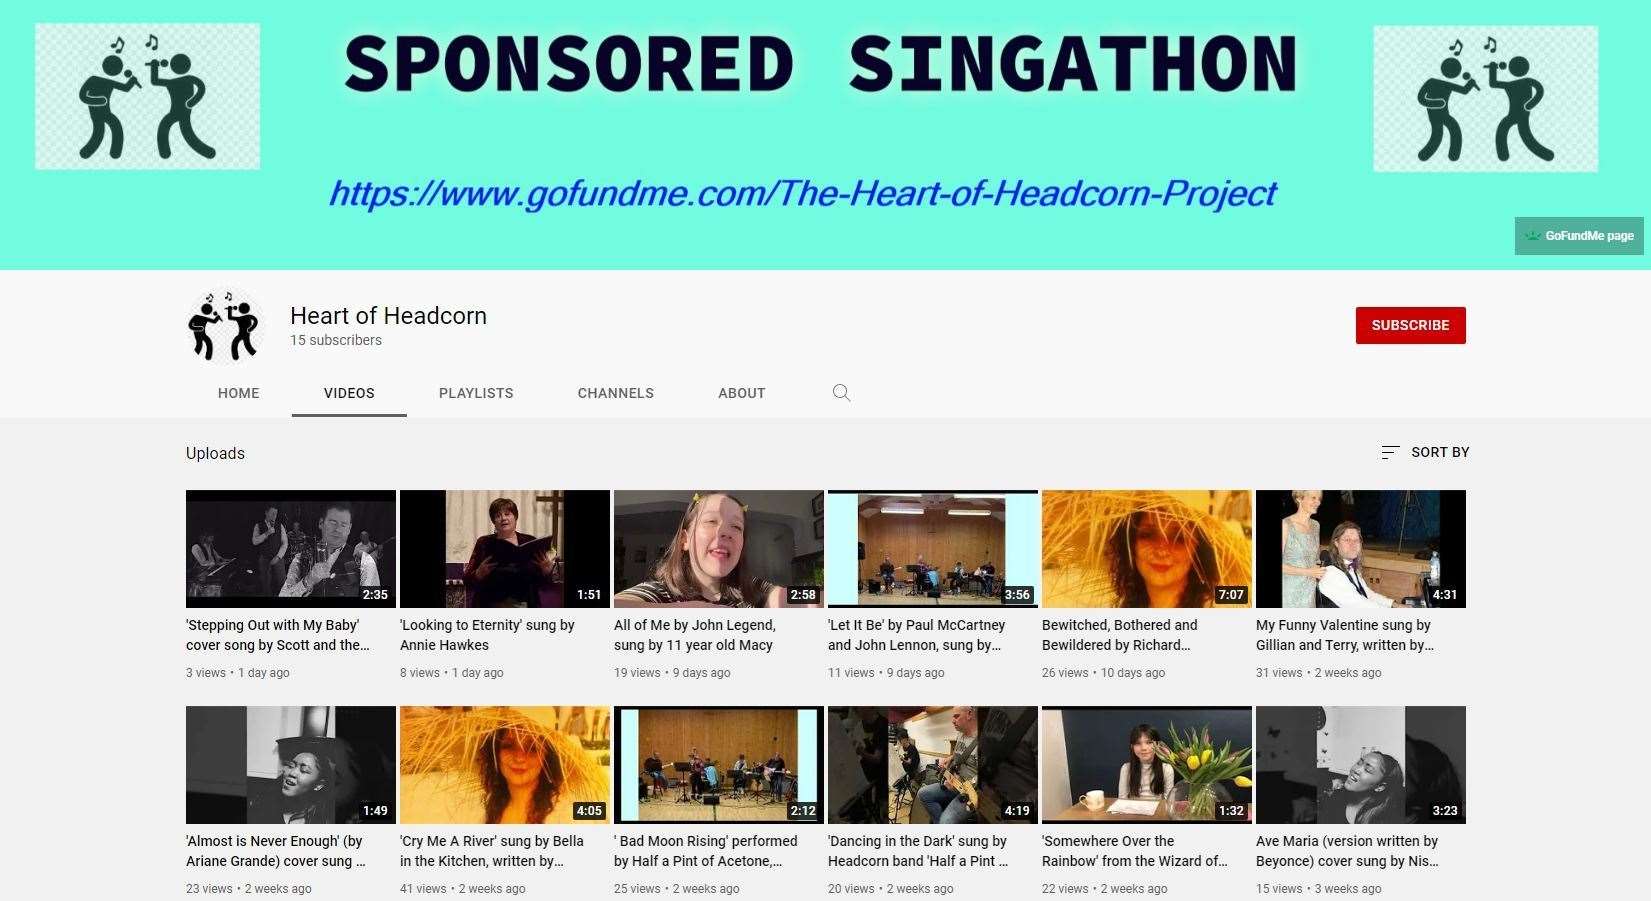 The online sponsored singalong in support of Heart of Headcorn